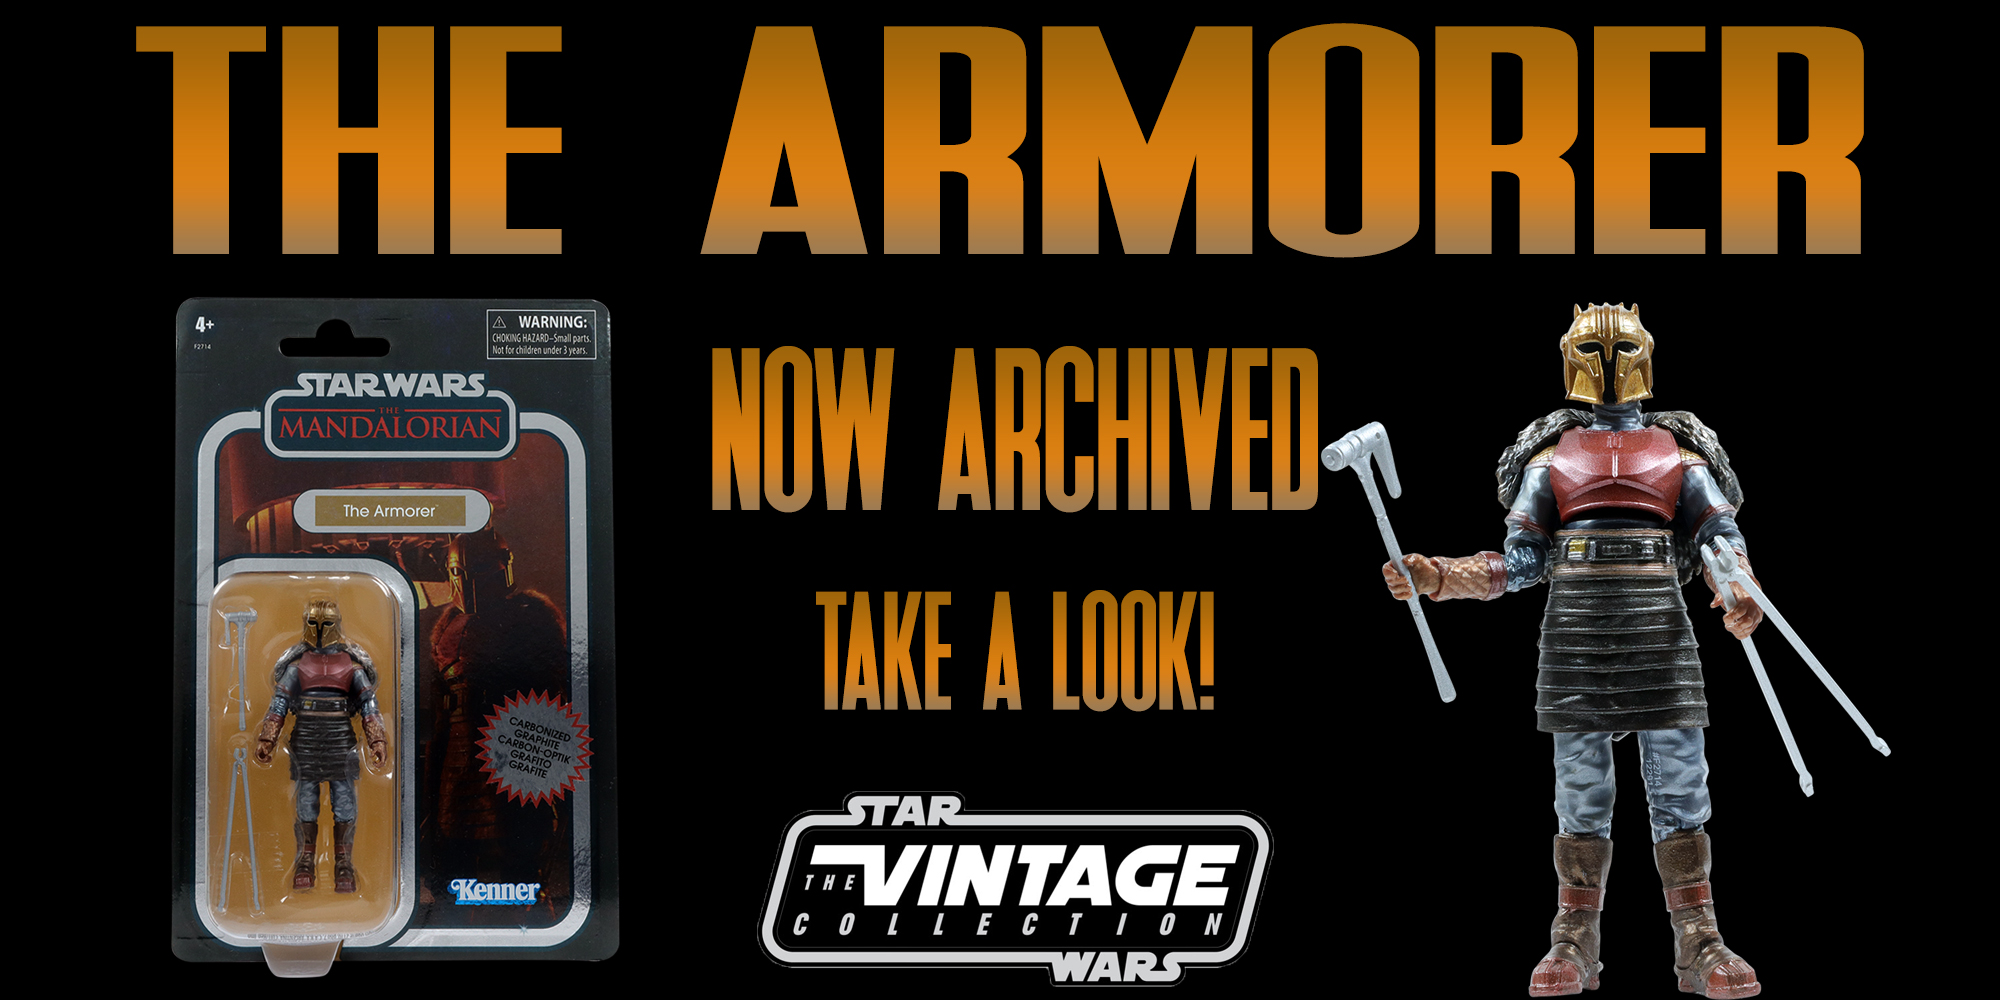 The Armorer (Carbonized) Archived!